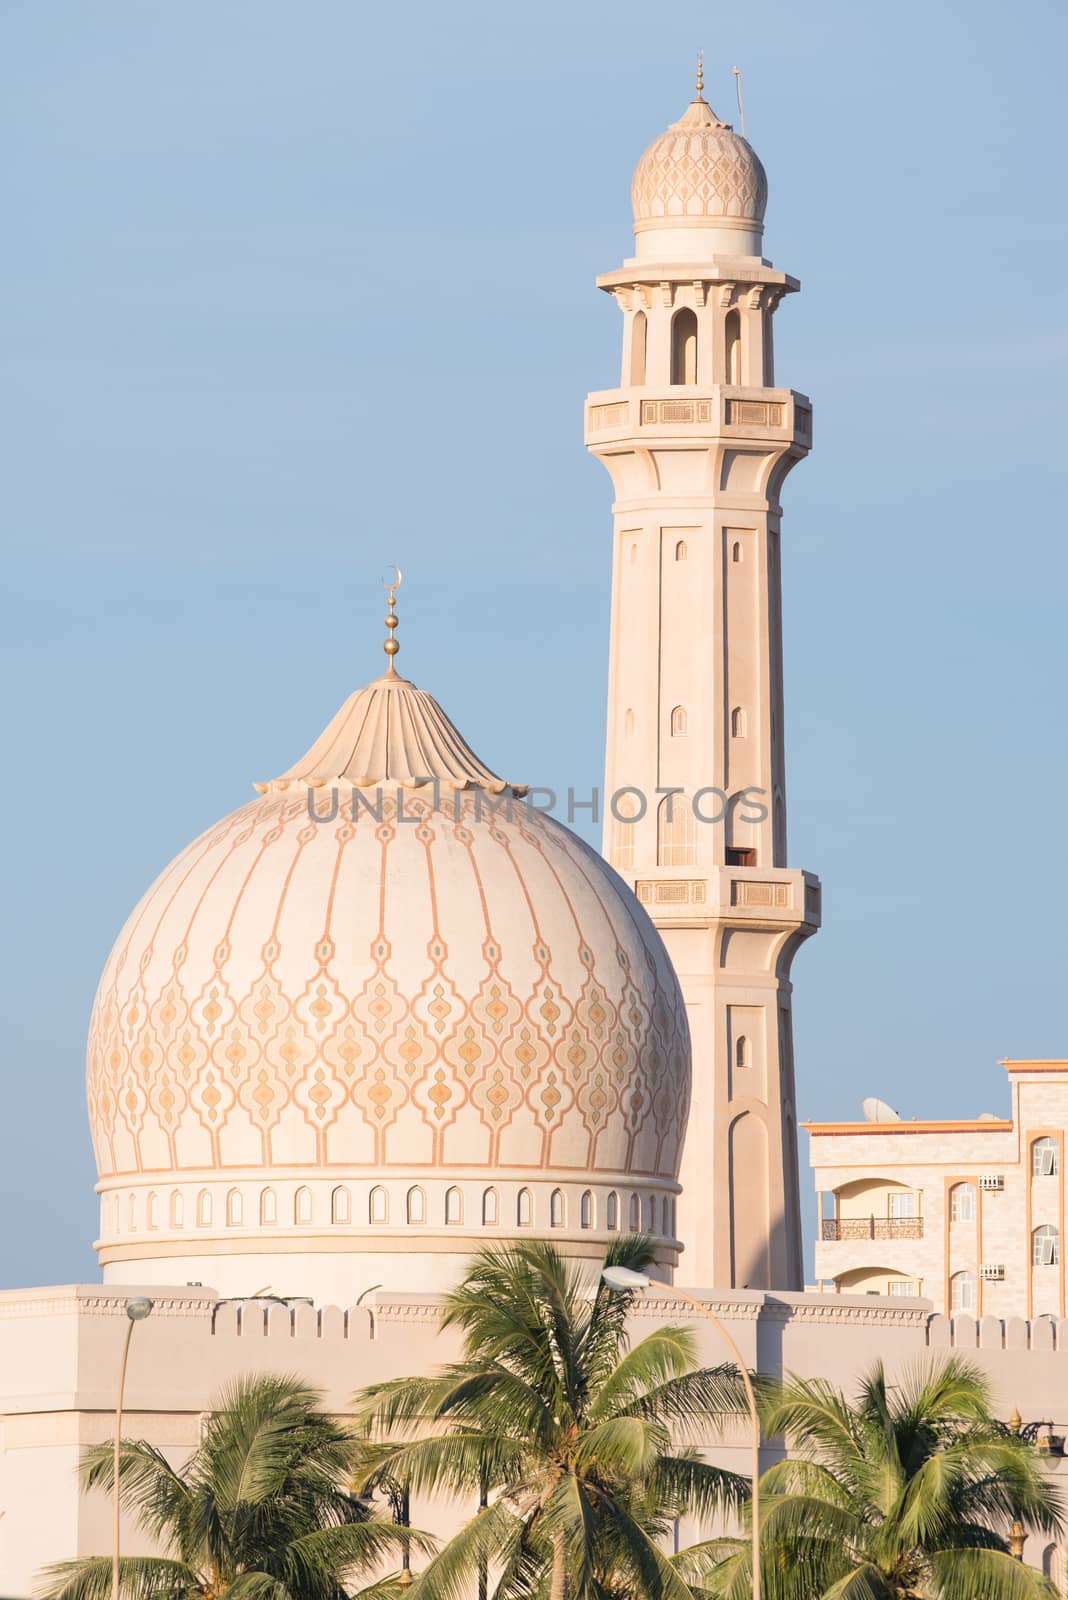 Dome and minaret of The Sultan Qaboos Grand Mosque in Salalah, Dhofar Region of Oman.